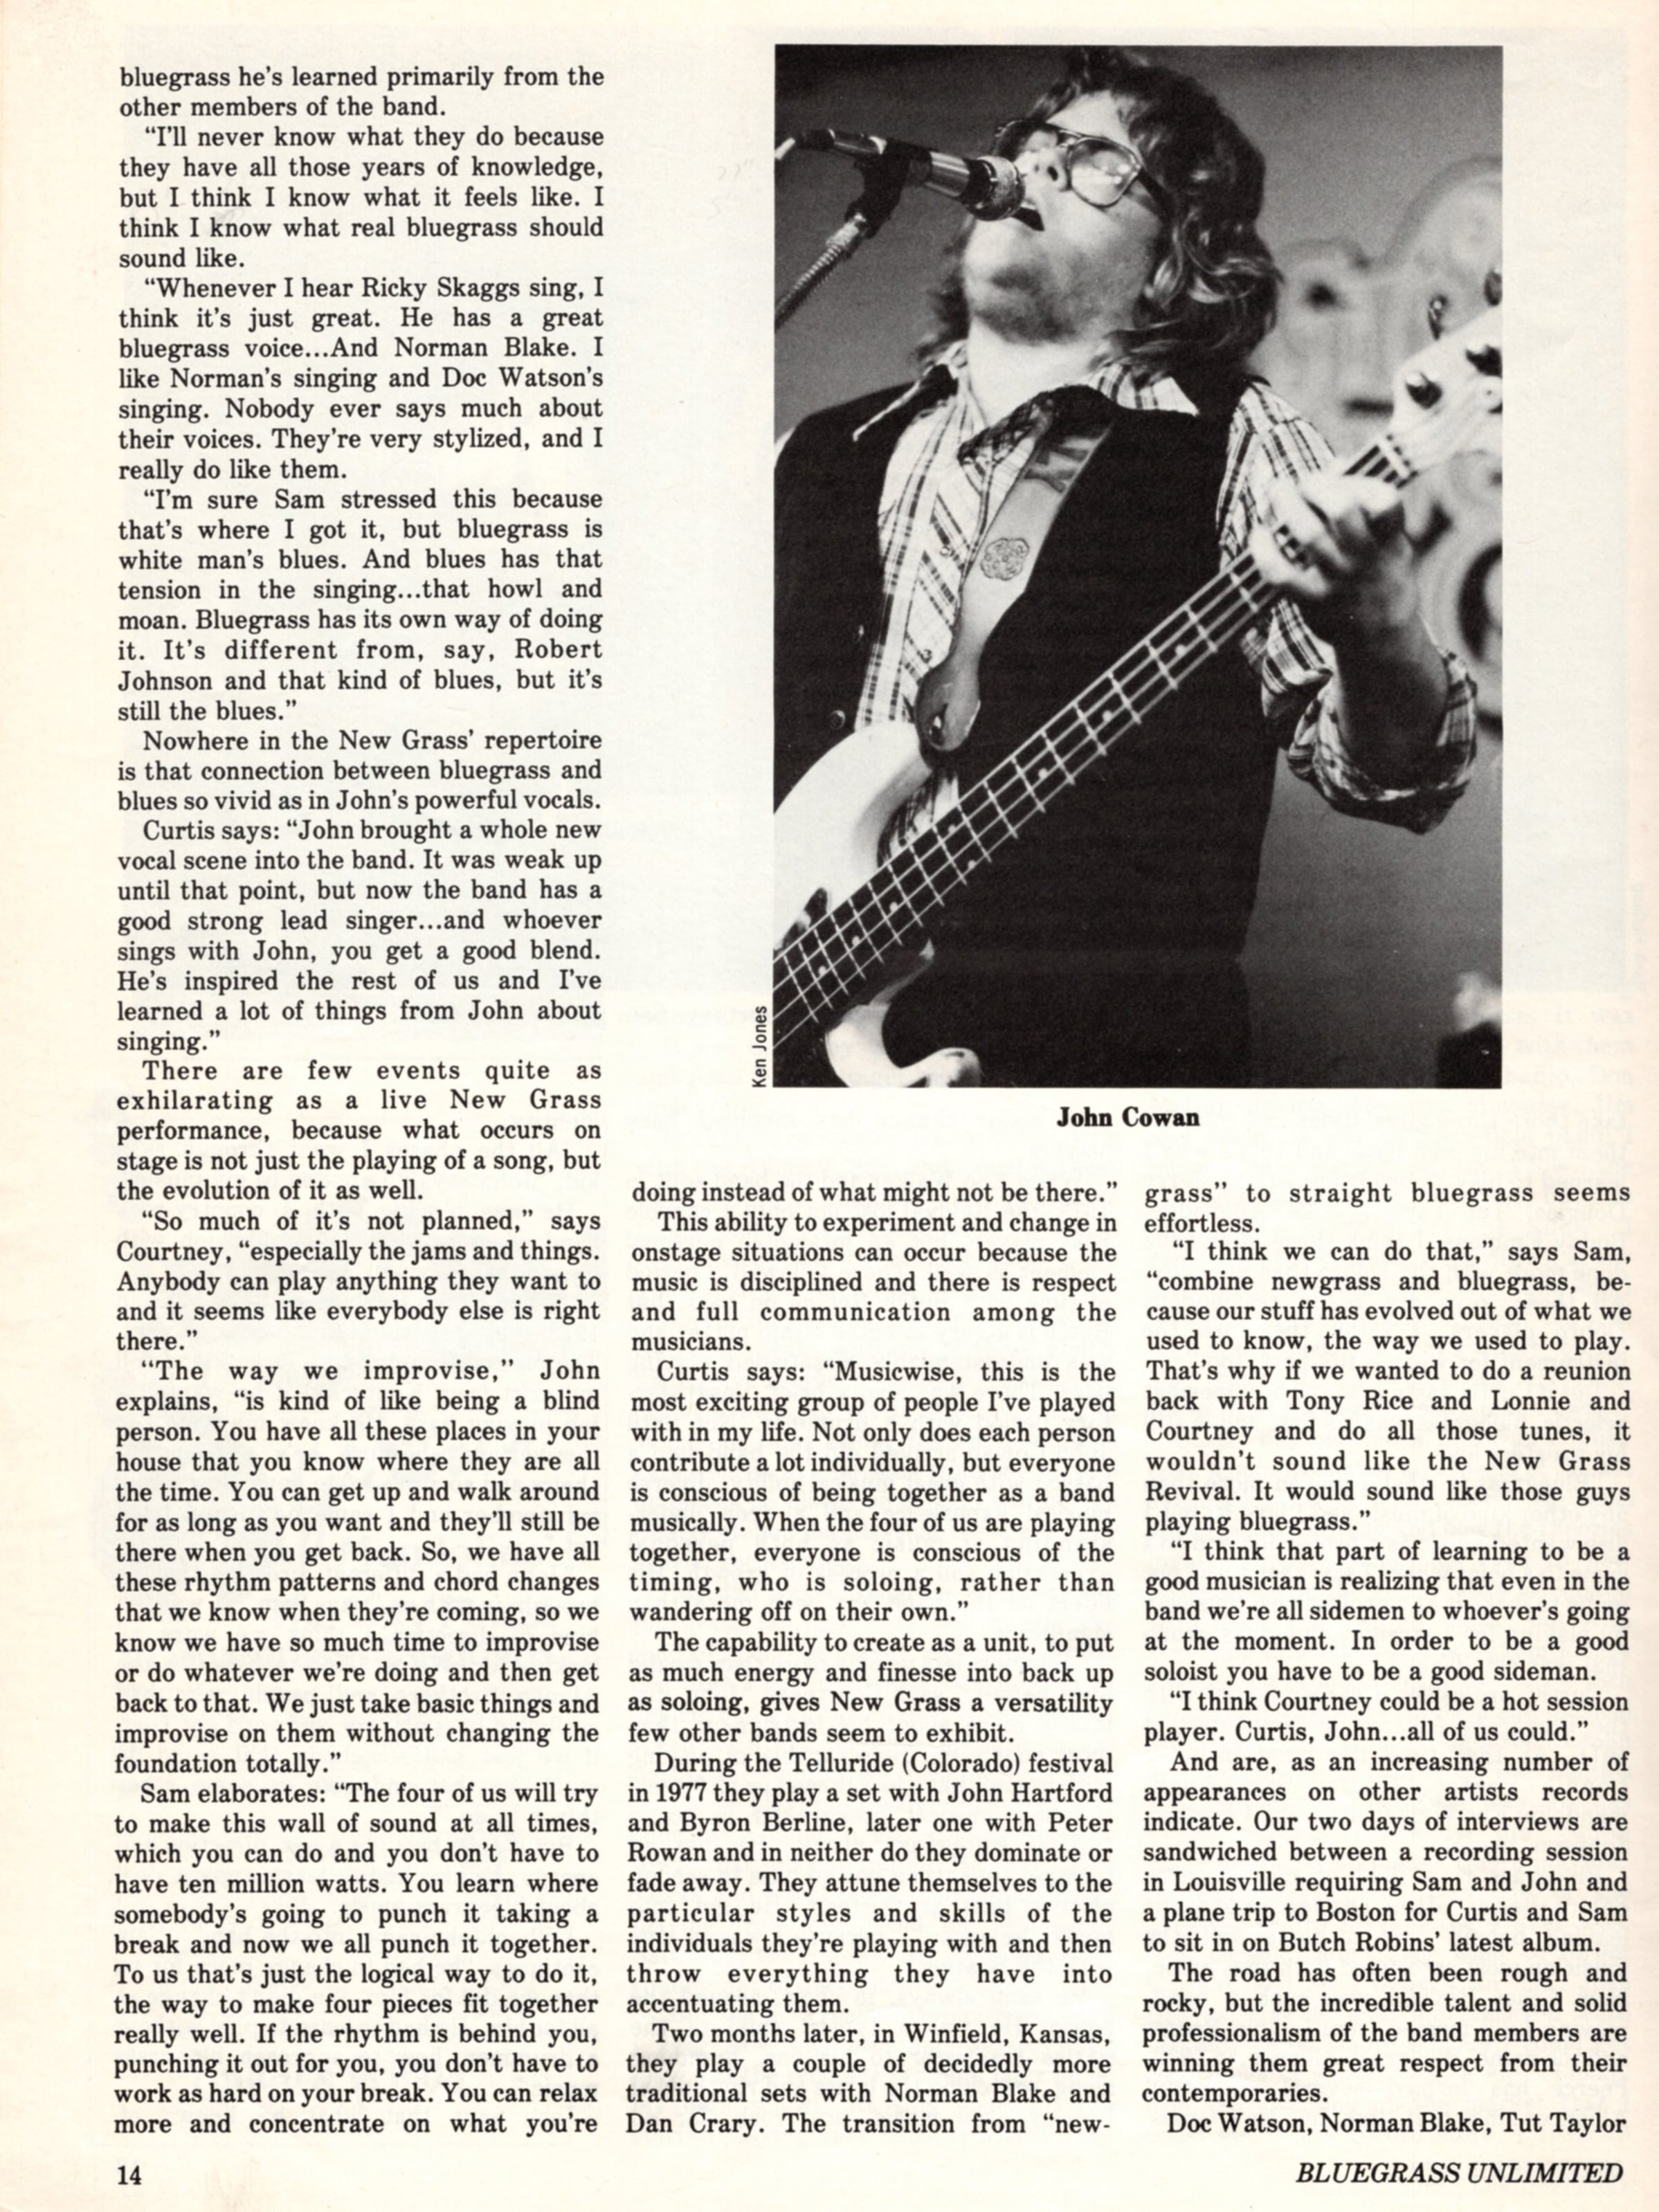 Clipping from original Bluegrass Unlimited magazine